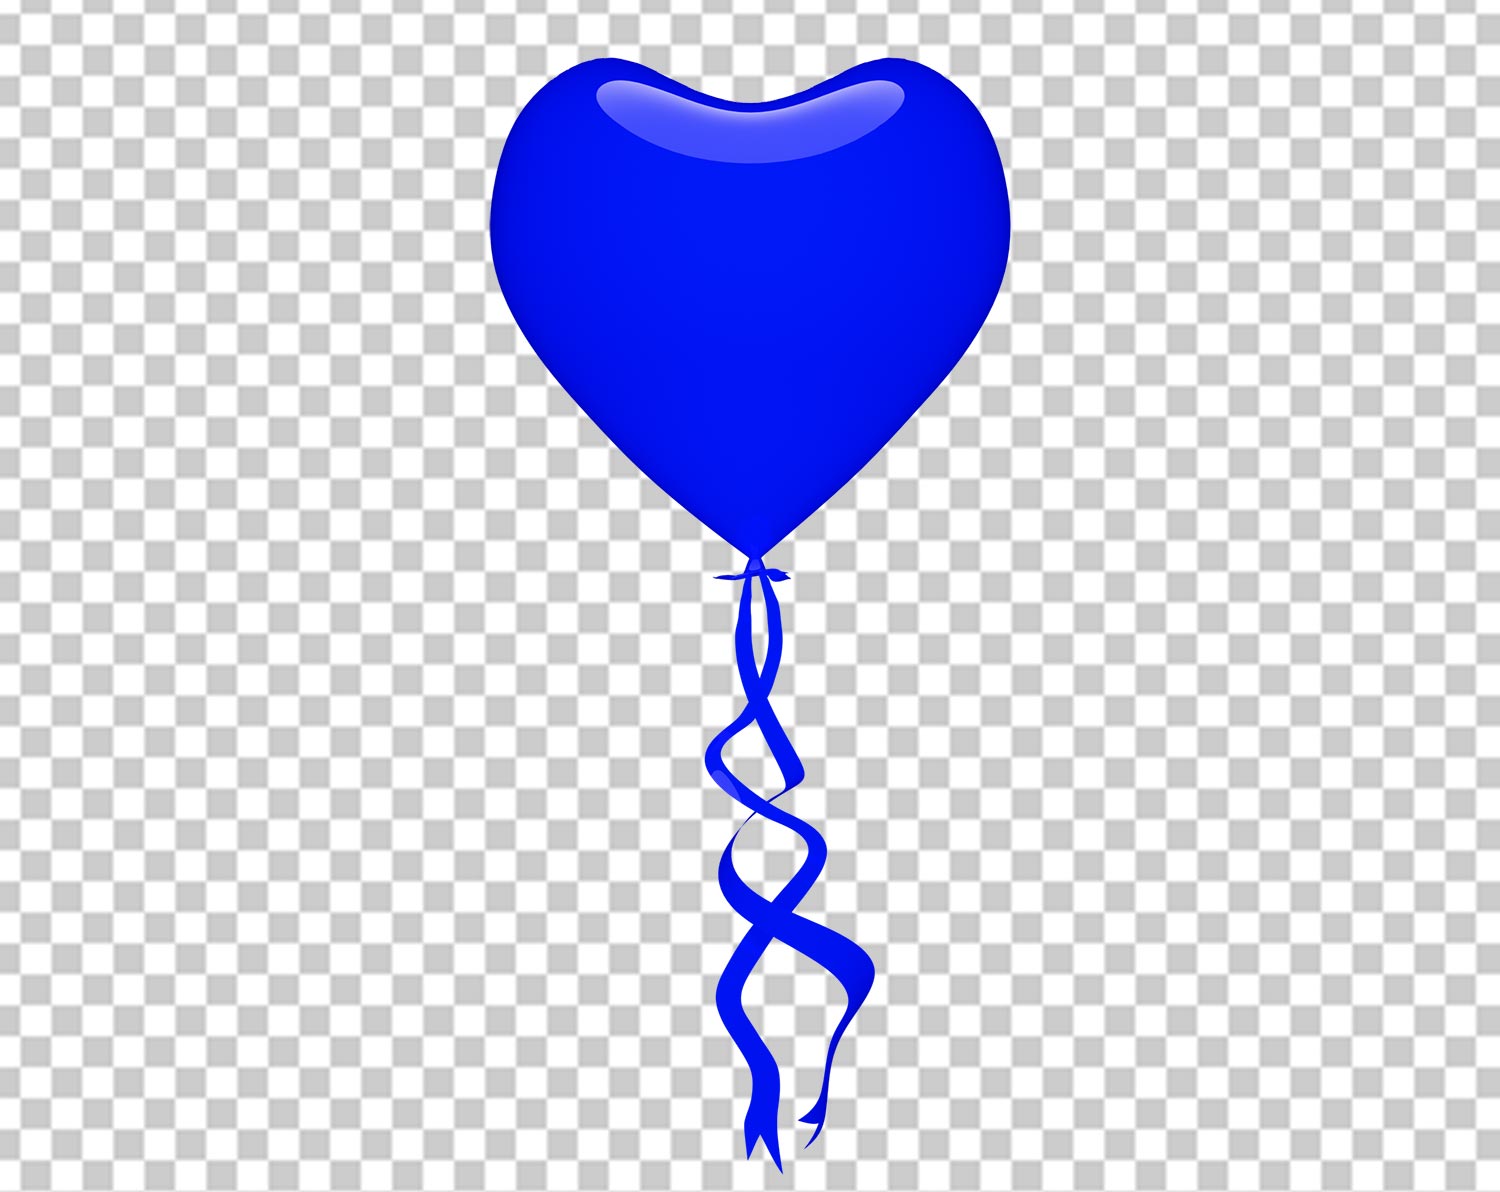 Blue Balloon Png Transparent Image Photo Free Download